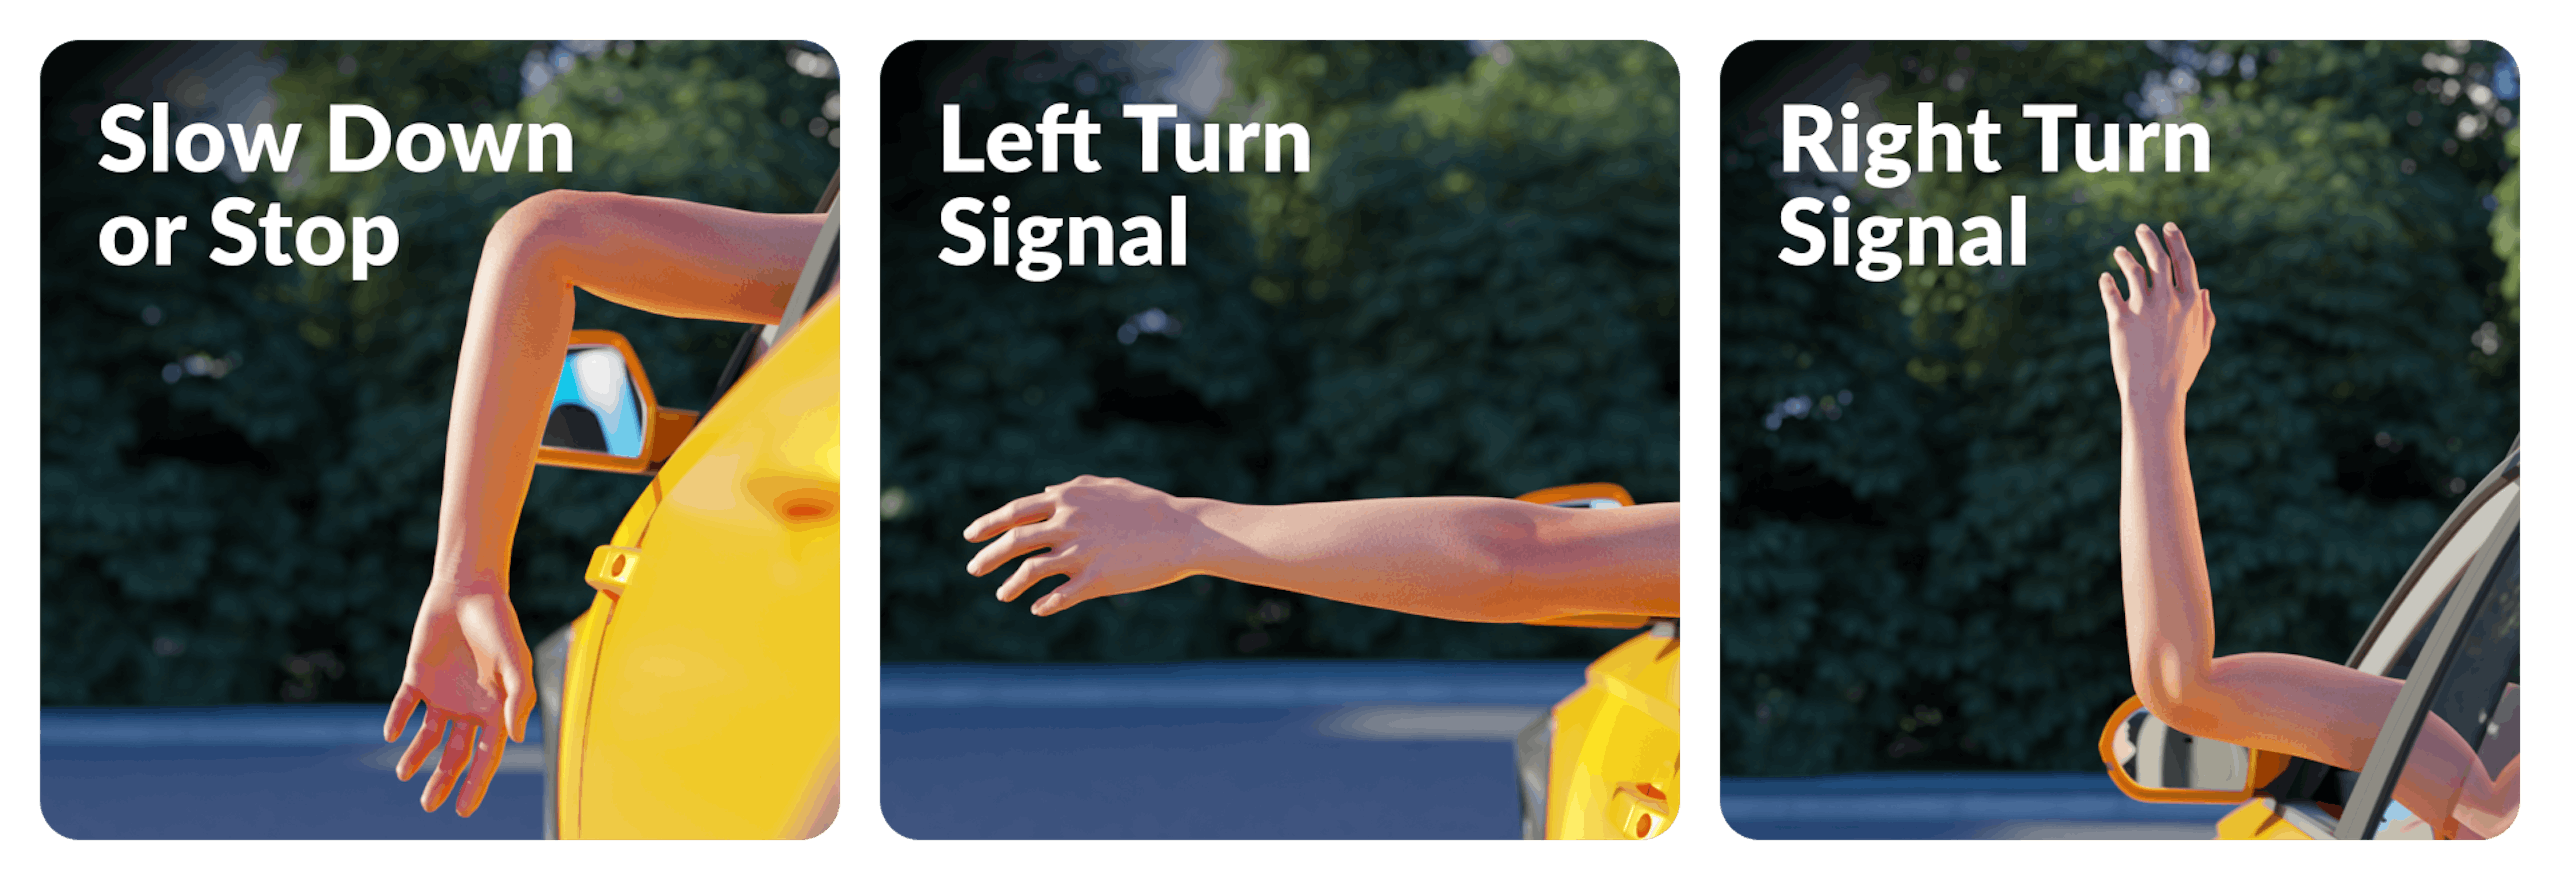 hand signals for driving test